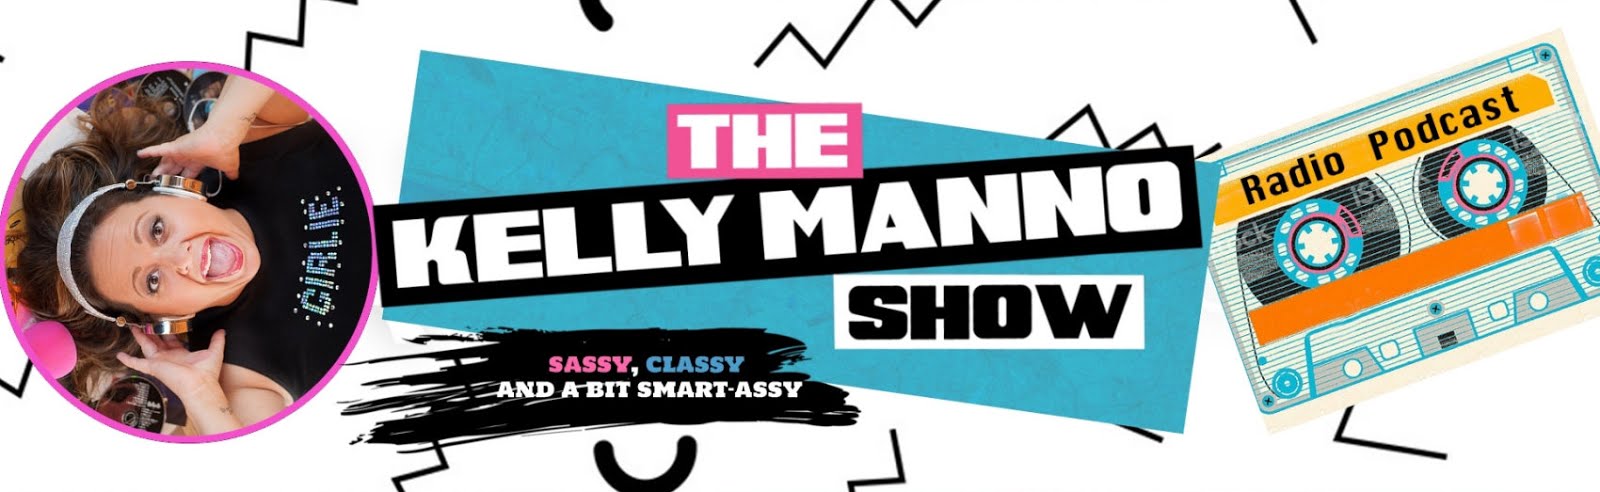 The Kelly Manno Show 